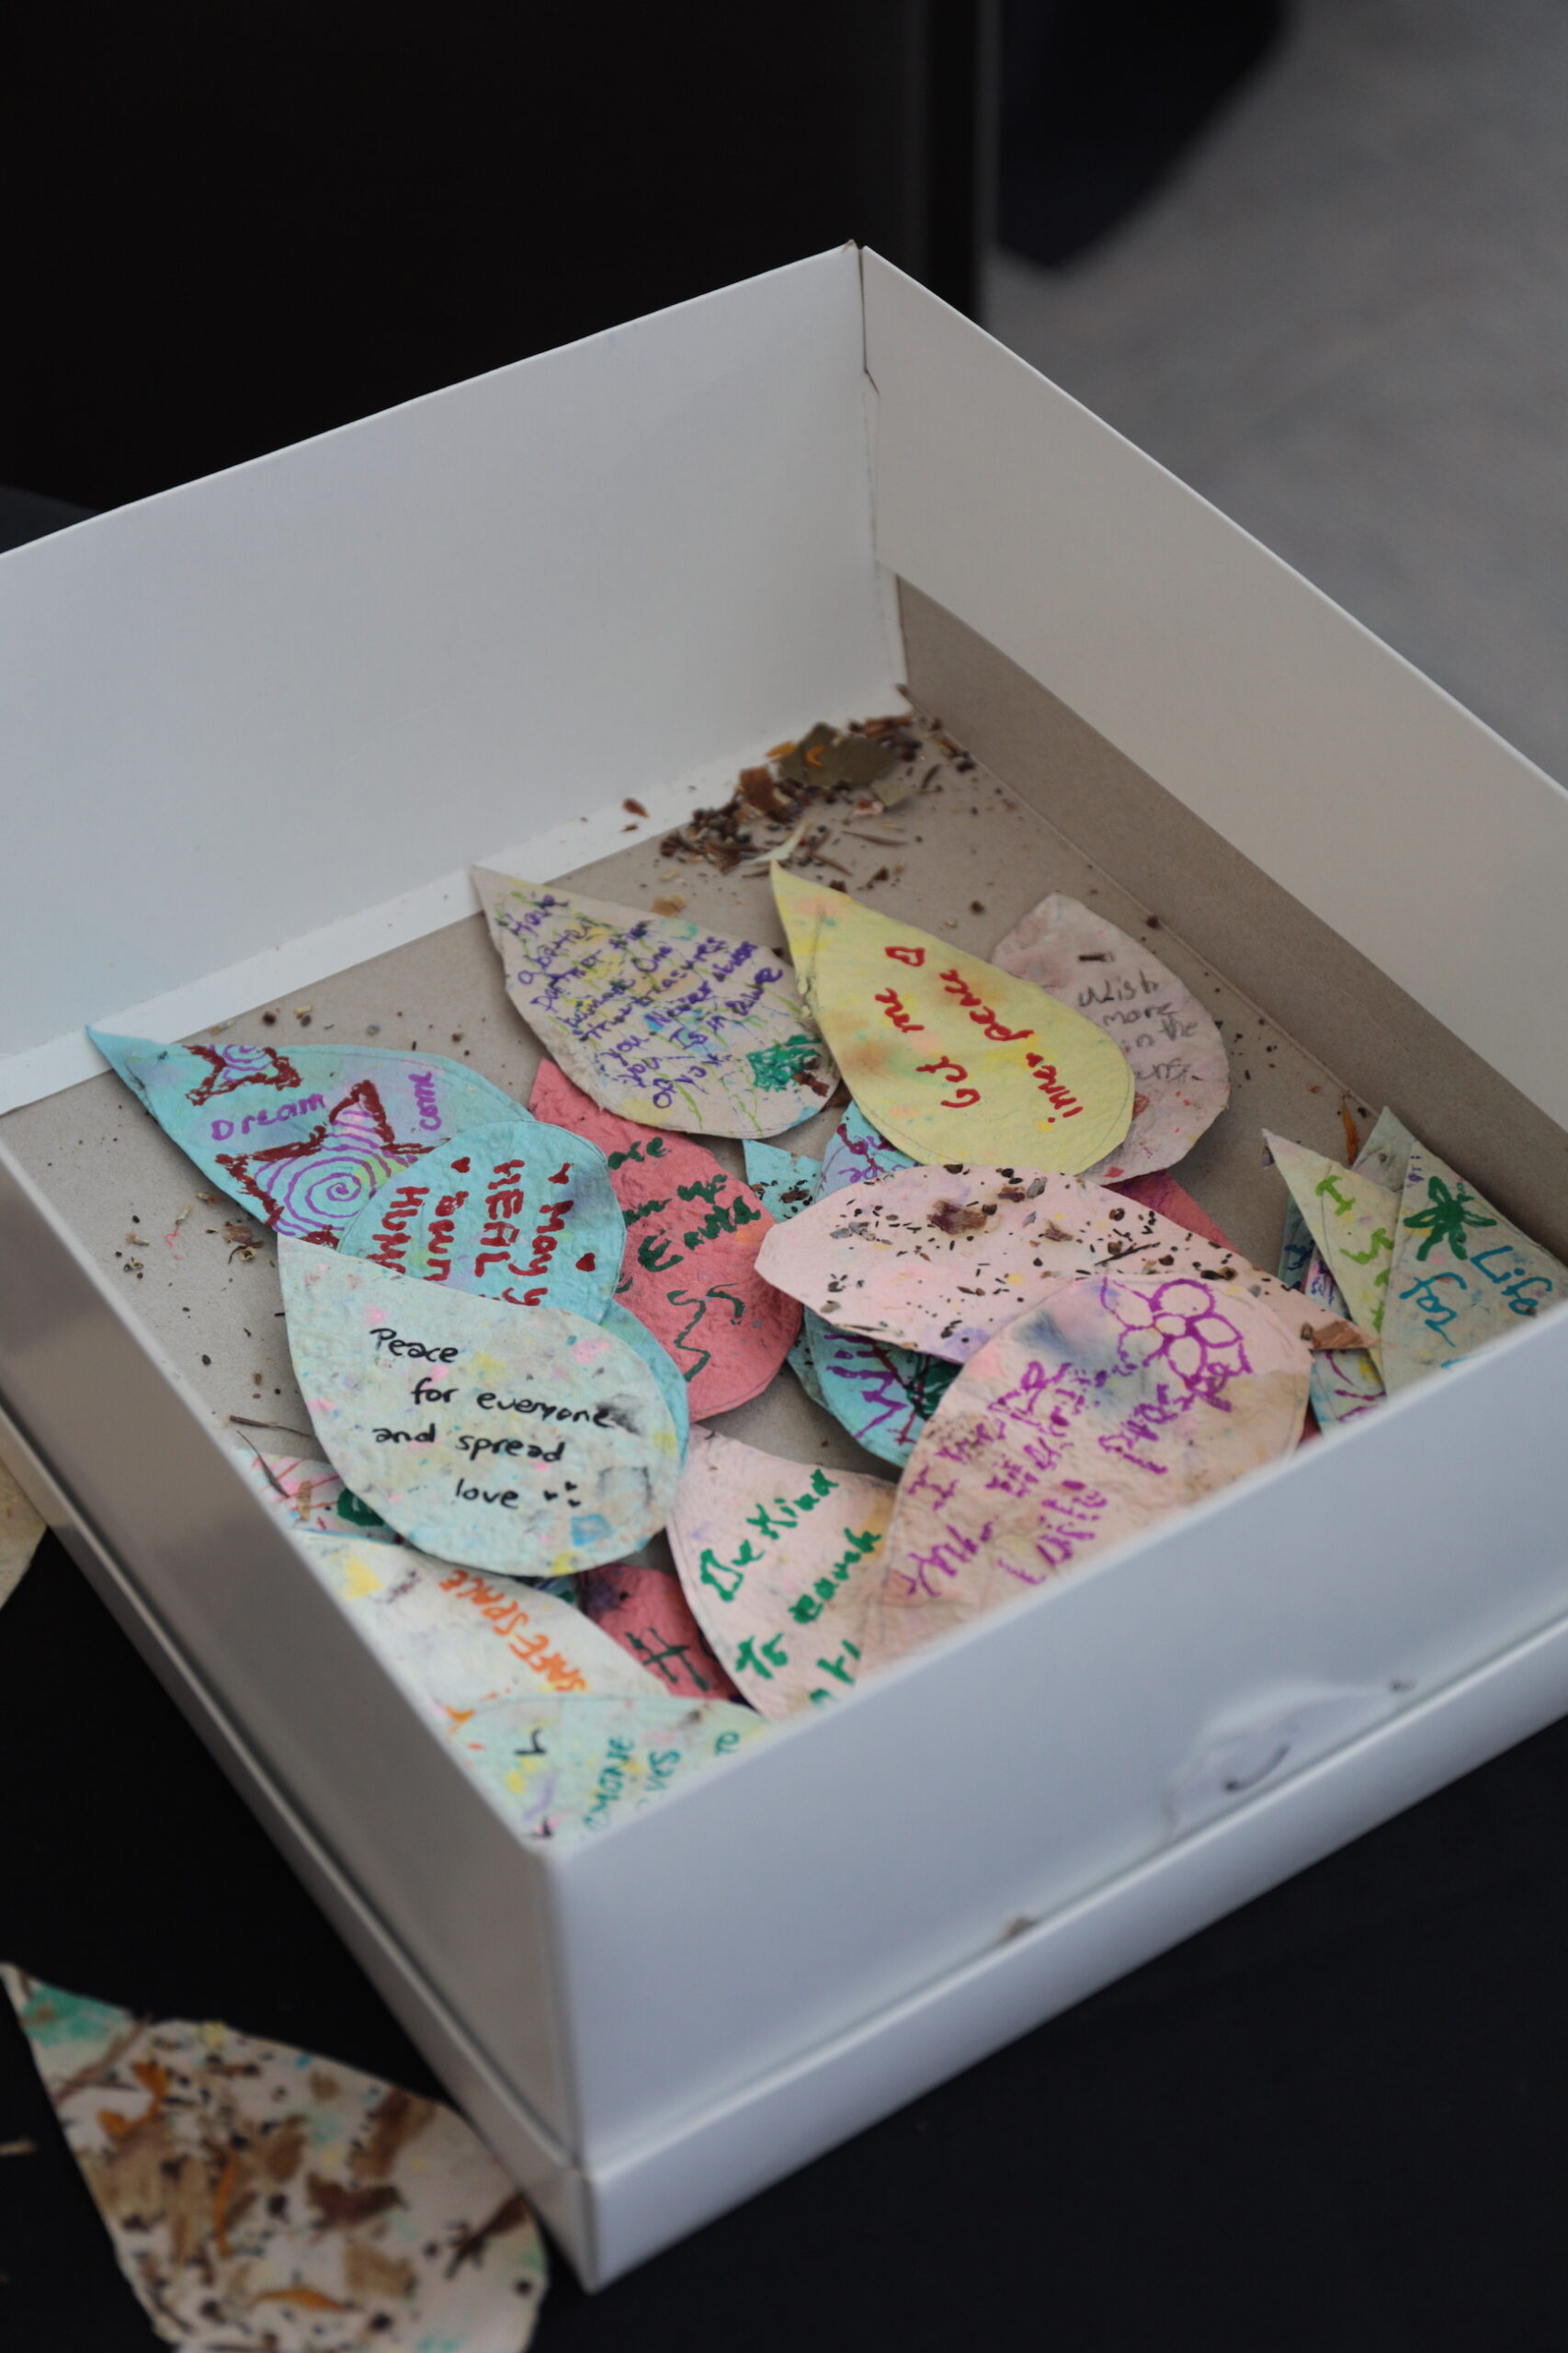 Box full of "Wishes for the Earth" written on seed paper in the shape of rain drops.